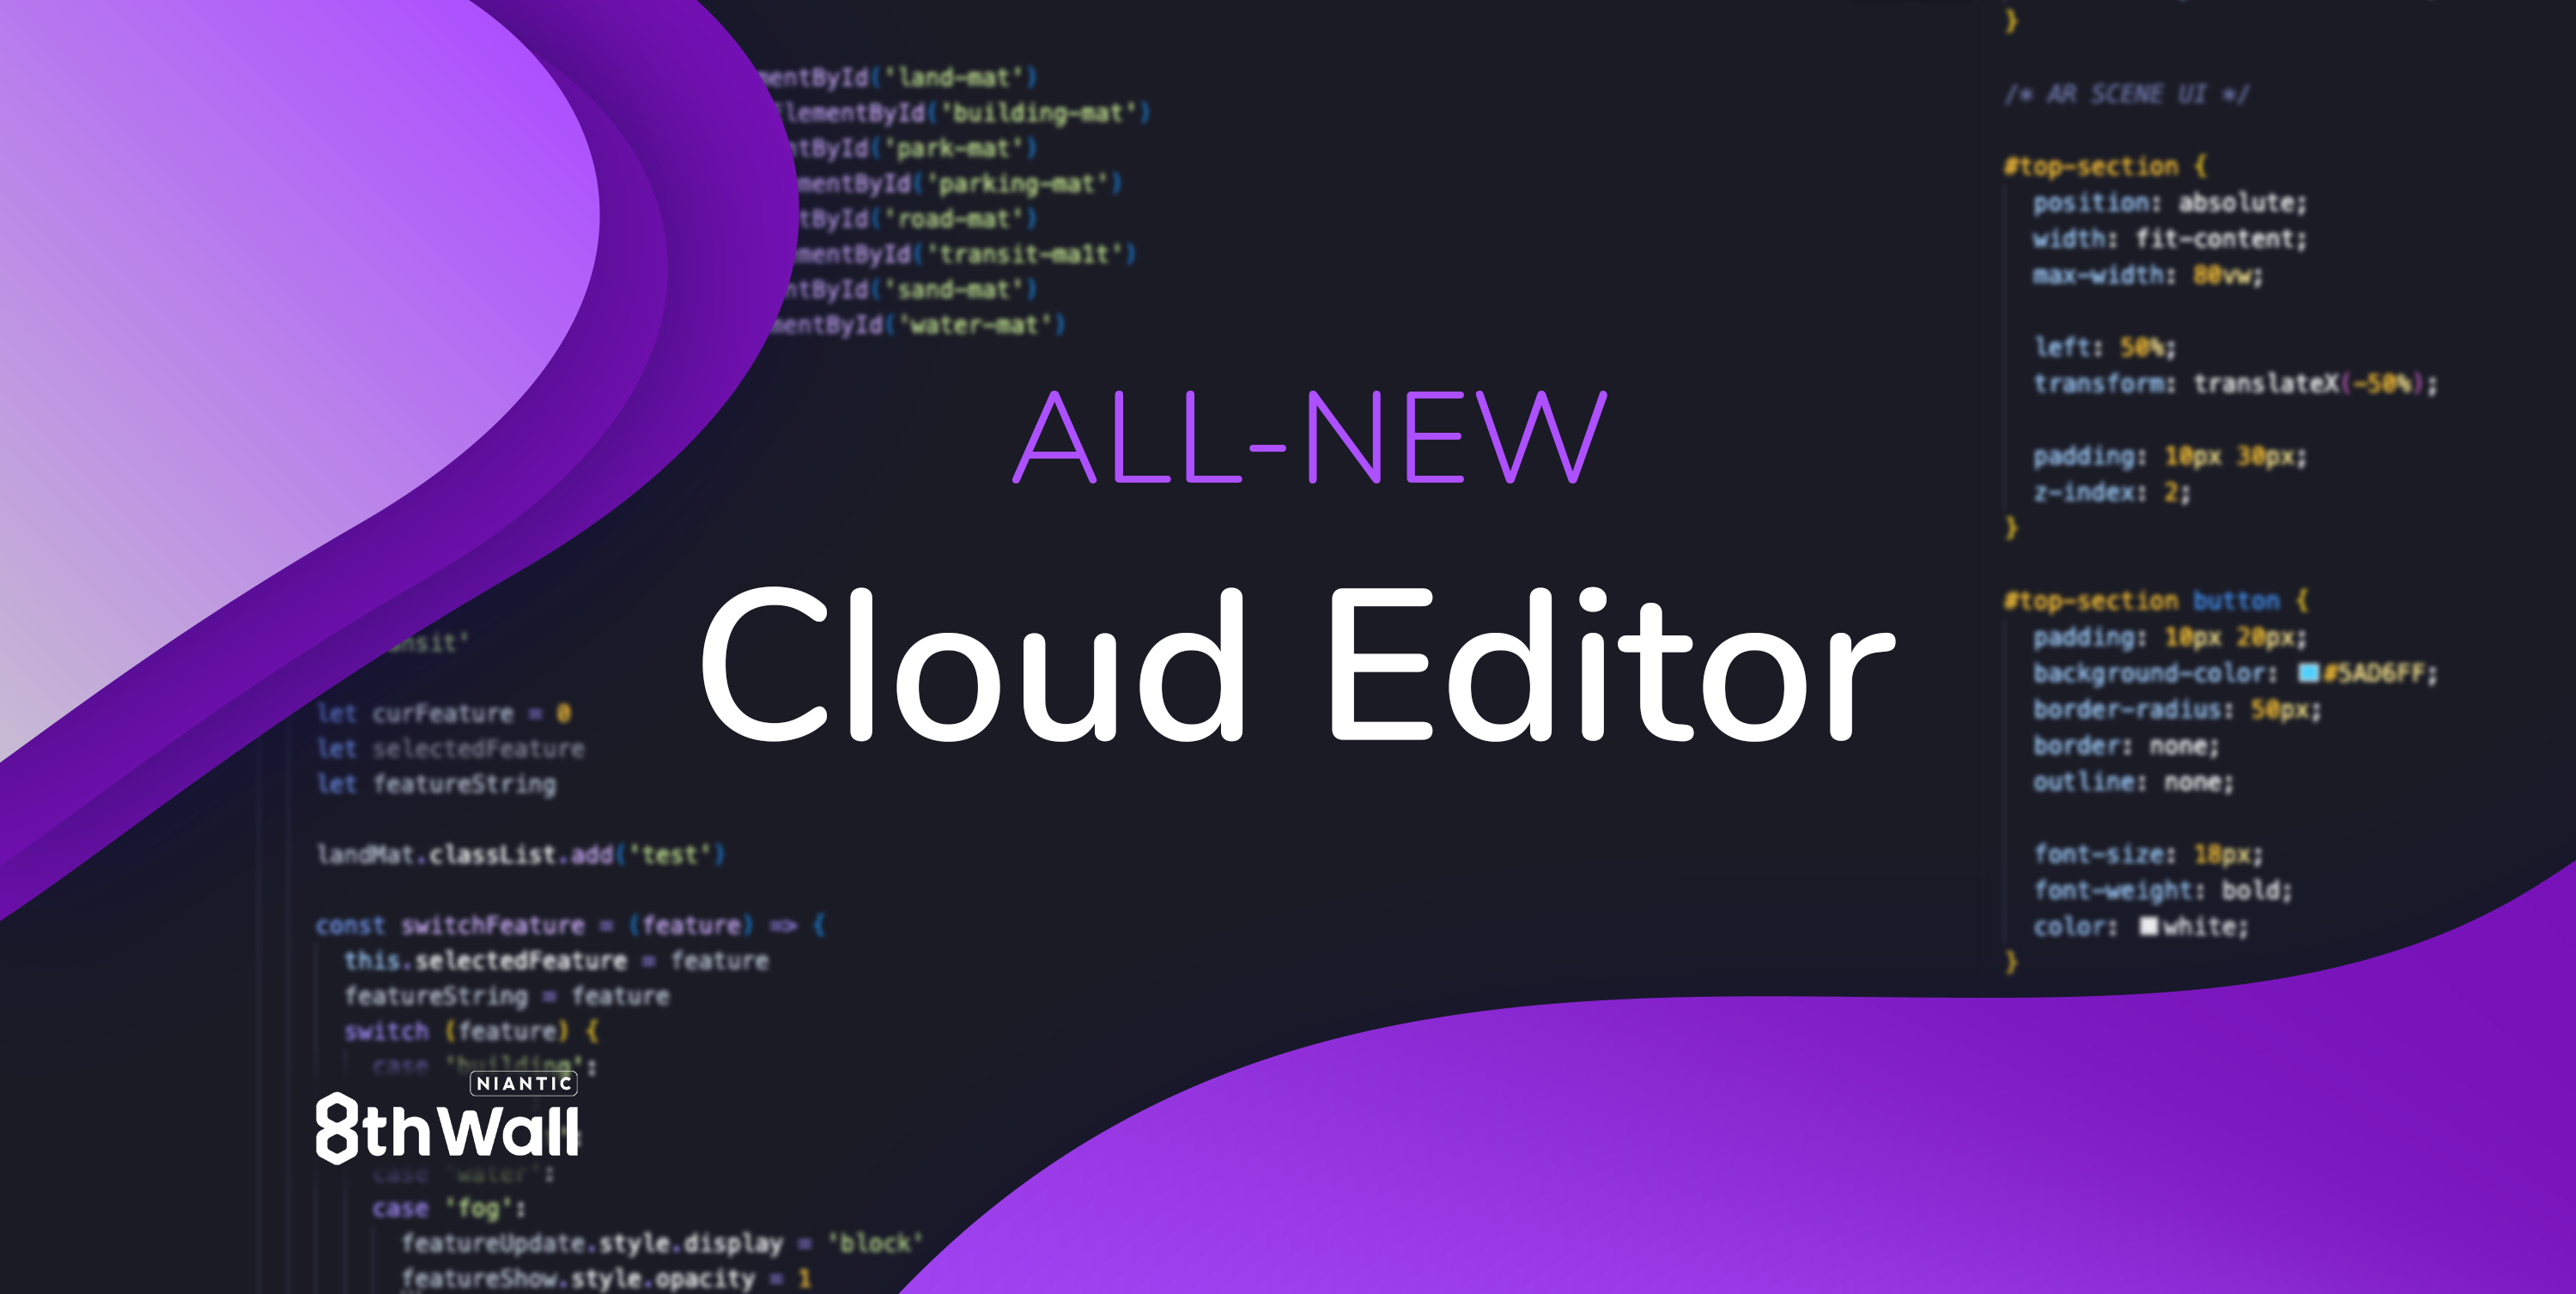 Introducing the all-new 8th Wall Cloud Editor